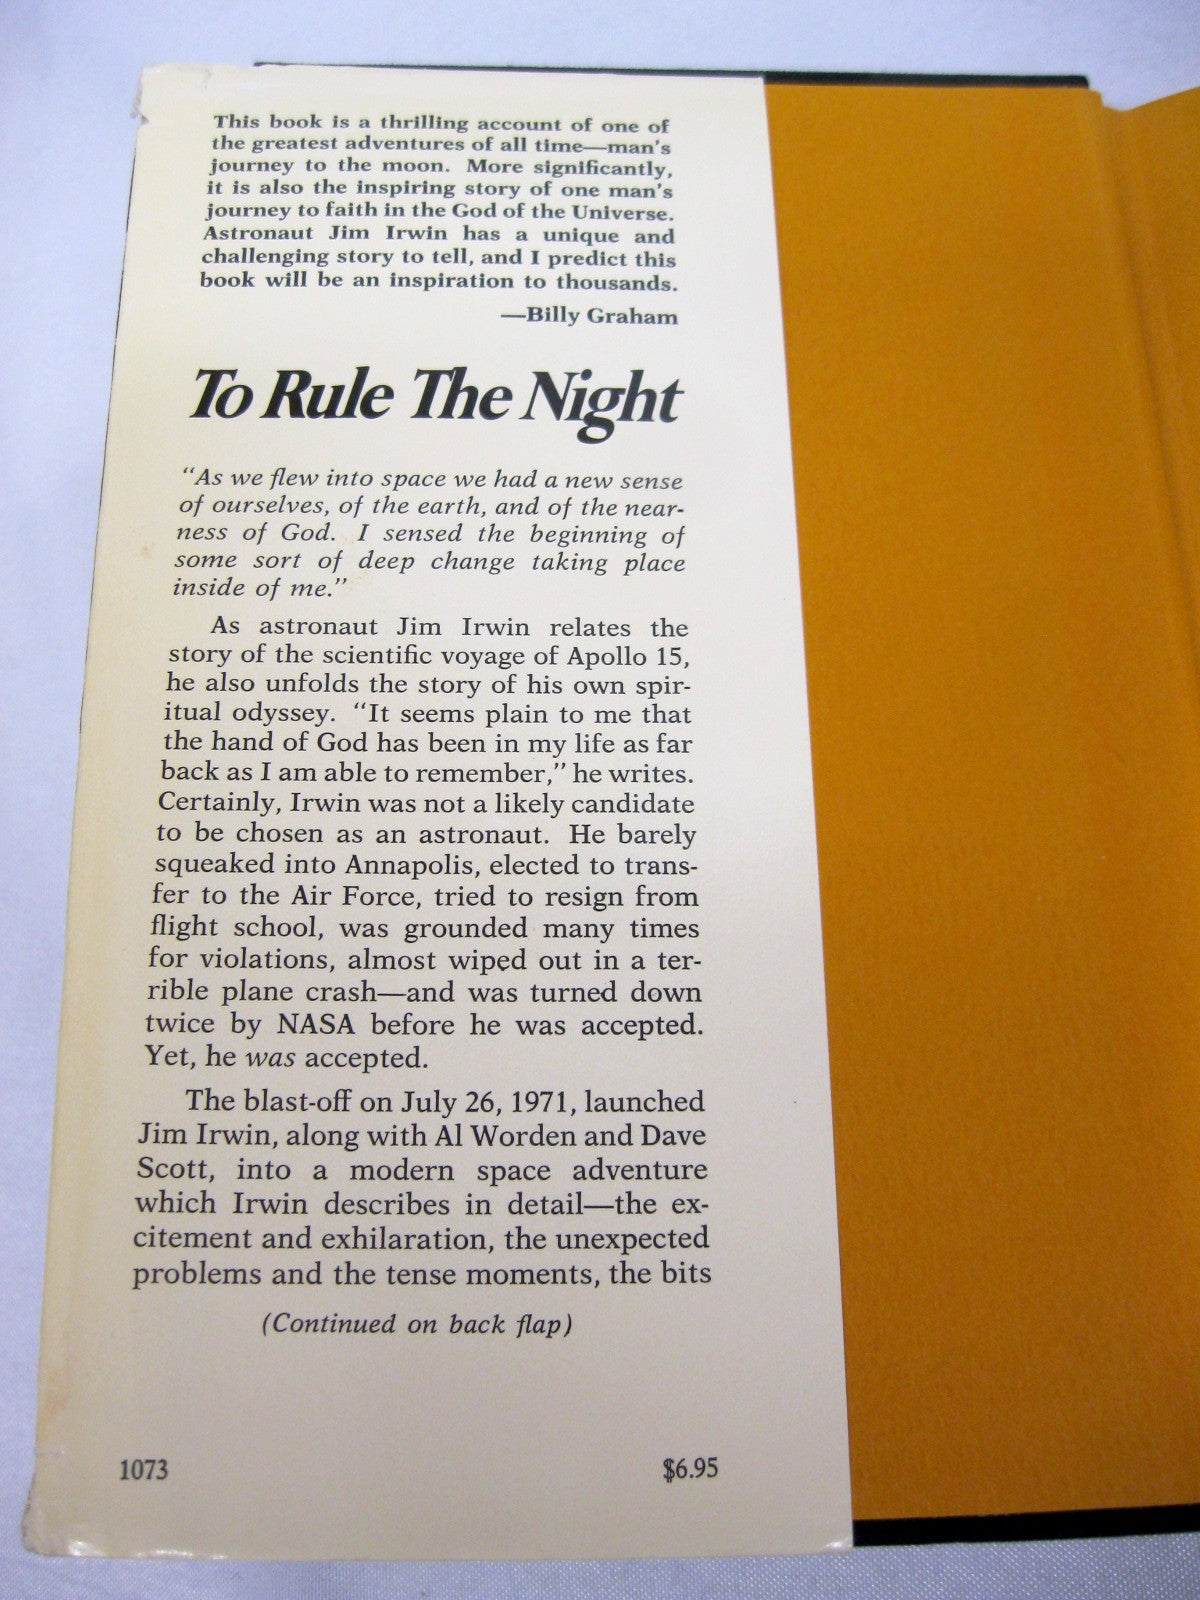 To Rule the Night: The Discovery Voyage of Astronaut Jim Irwin by James B. Irwin and William A. Emerson Jr. (Hardcover)